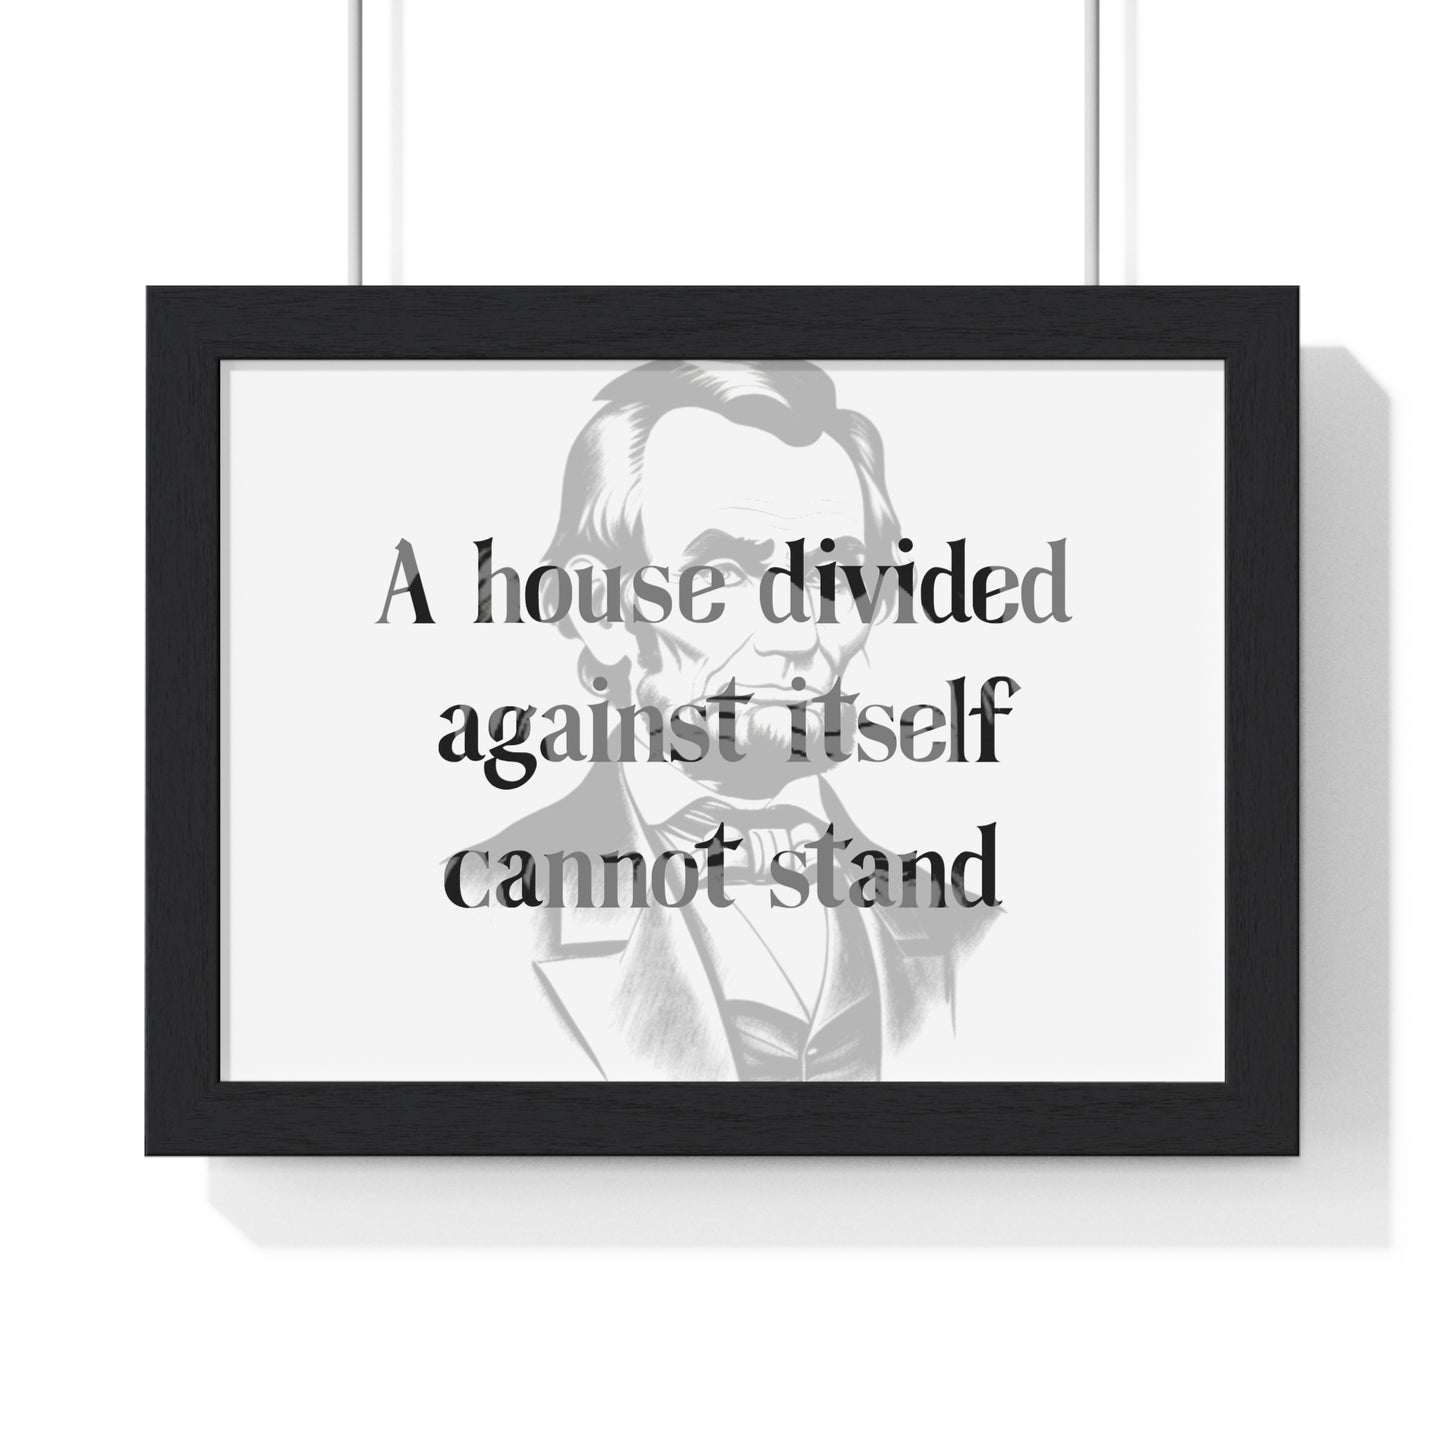 Abraham Lincoln Quote 6, Poster Art, Horizontal Light Print, 16th President of the United States, American Patriots, AI Art, Political Art, Poster Prints, Presidential Portraits, Presidential Quotes, Inspirational Quotes